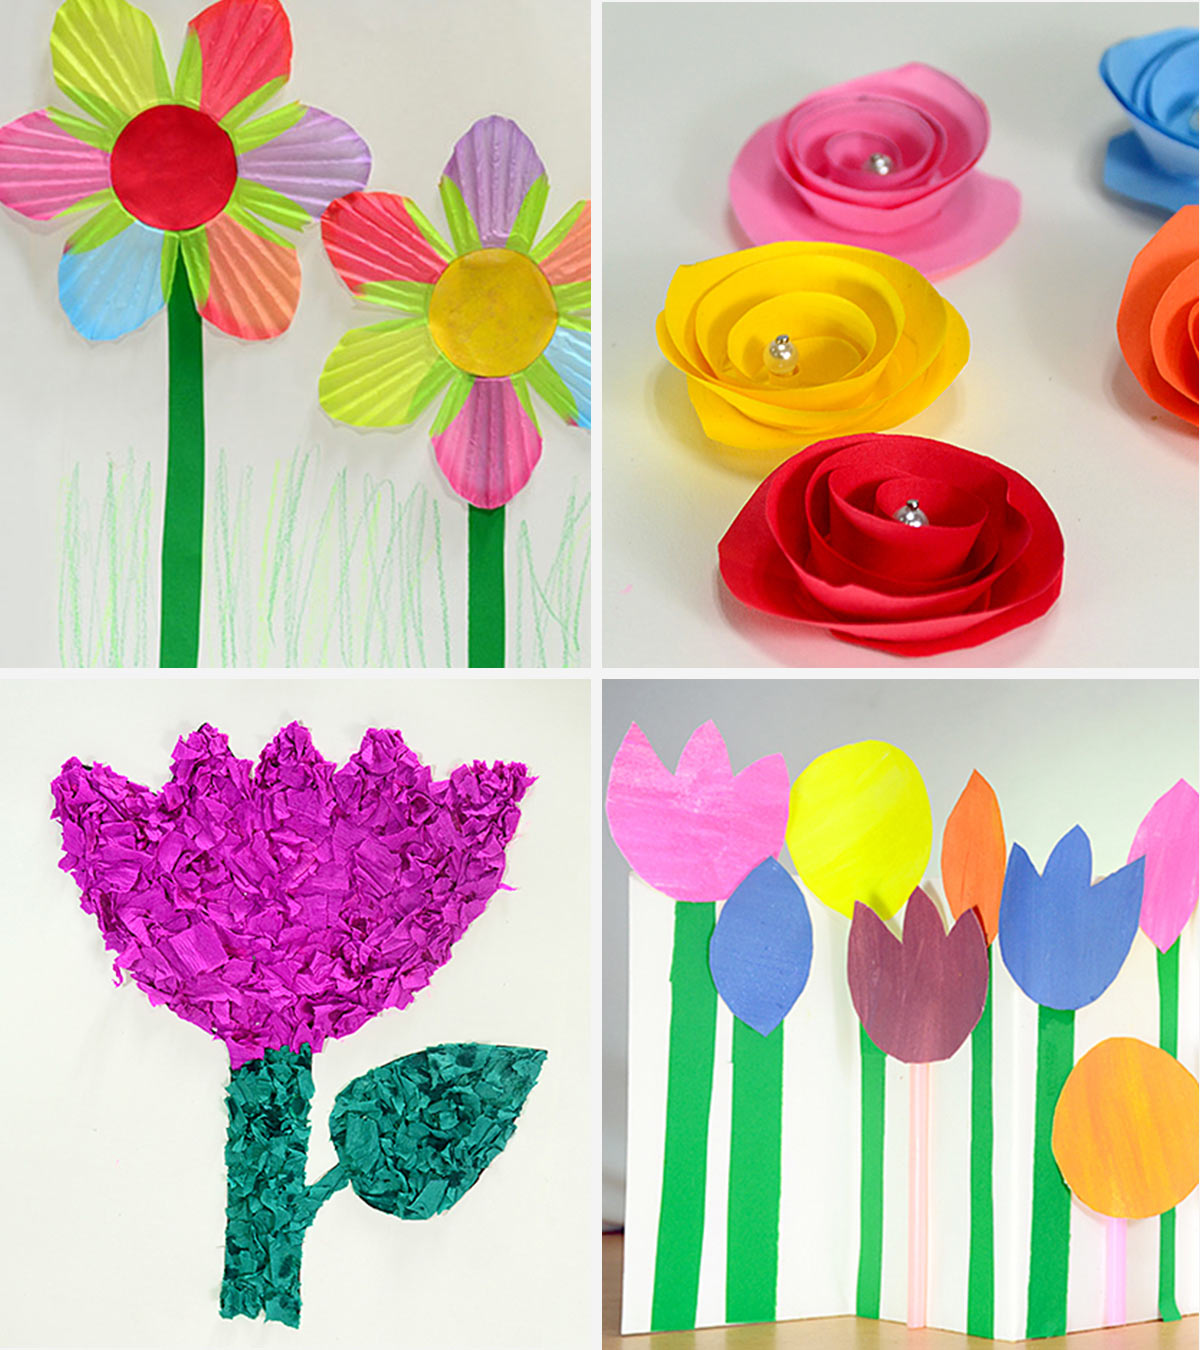 How To Make Paper Flowers For Kids,Diy Gifts For Friends During Quarantine